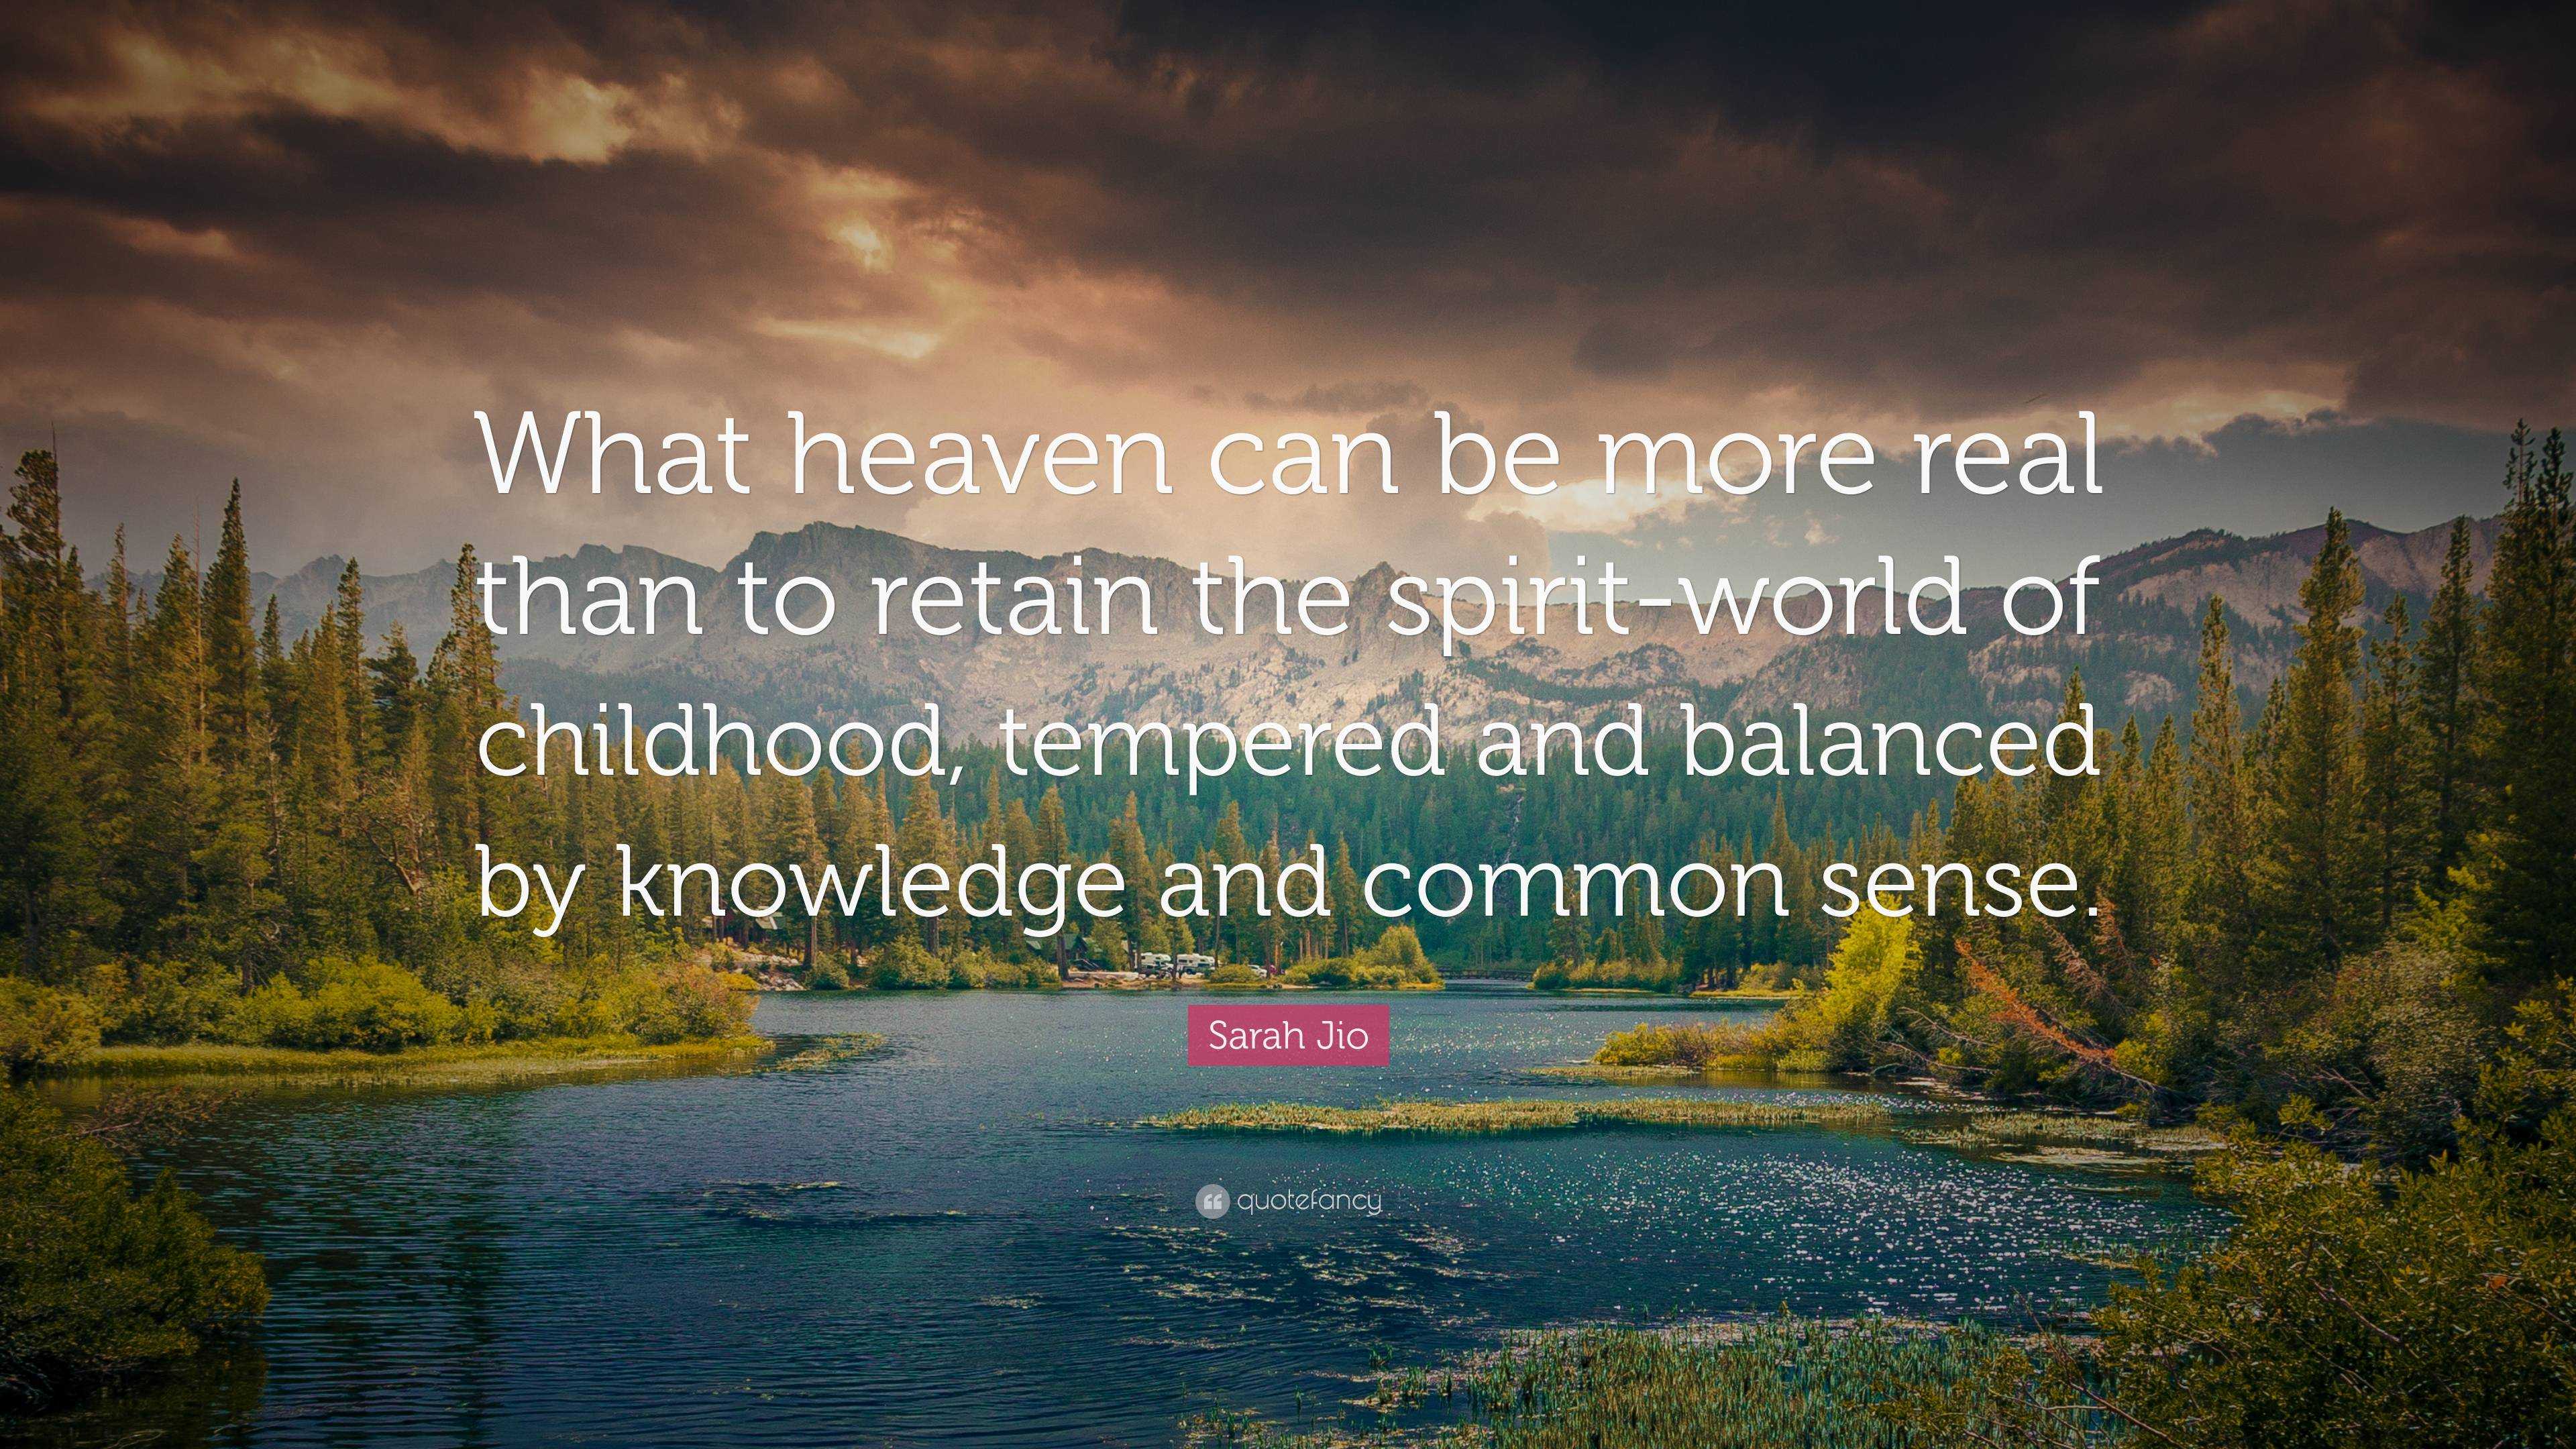 Sarah Jio Quote: “What heaven can be more real than to retain the  spirit-world of childhood, tempered and balanced by knowledge and common”